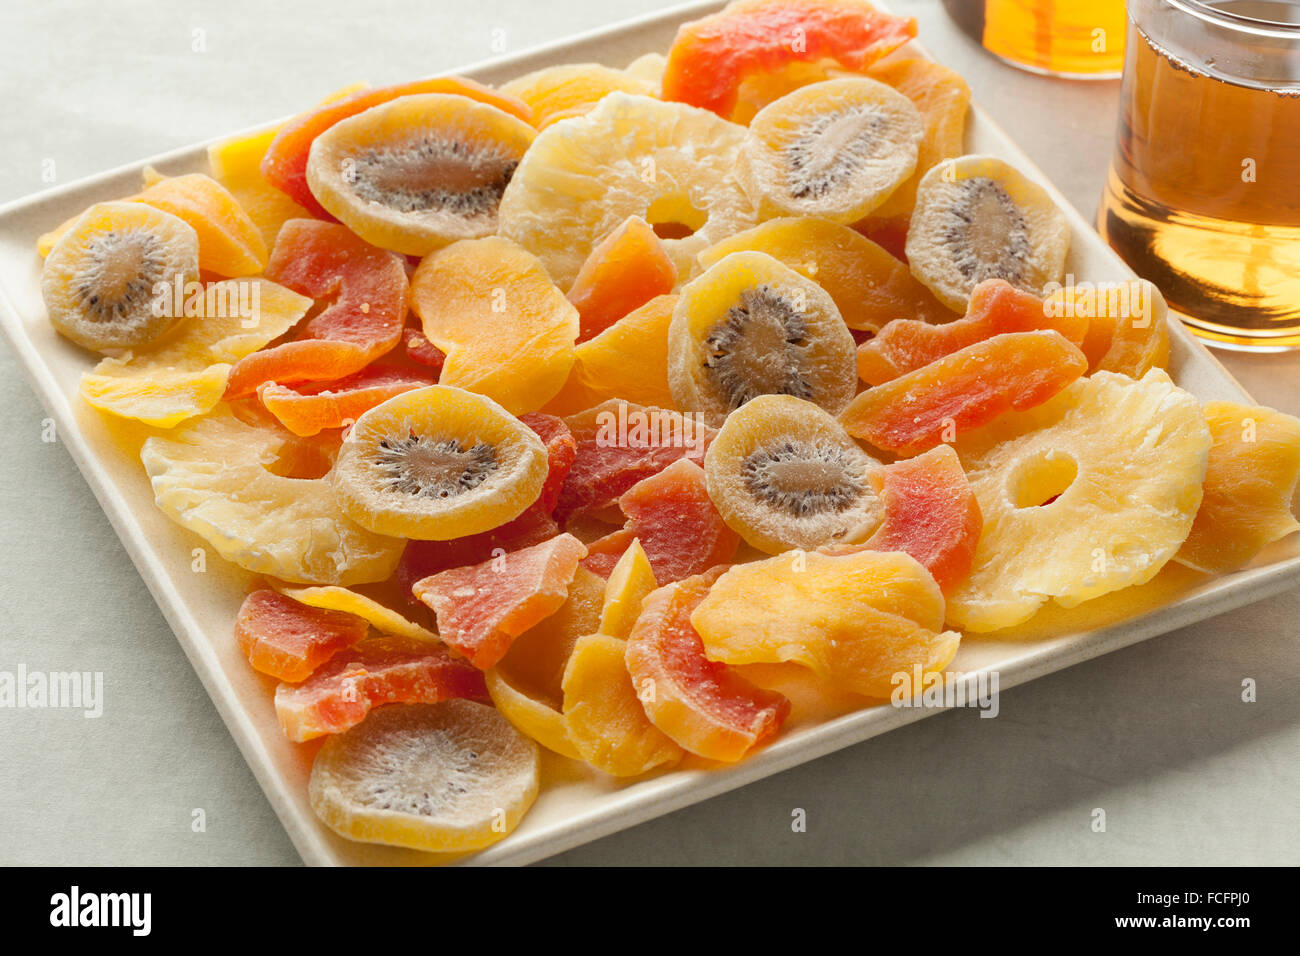 Dried and candied fruit as a snack with tea Stock Photo